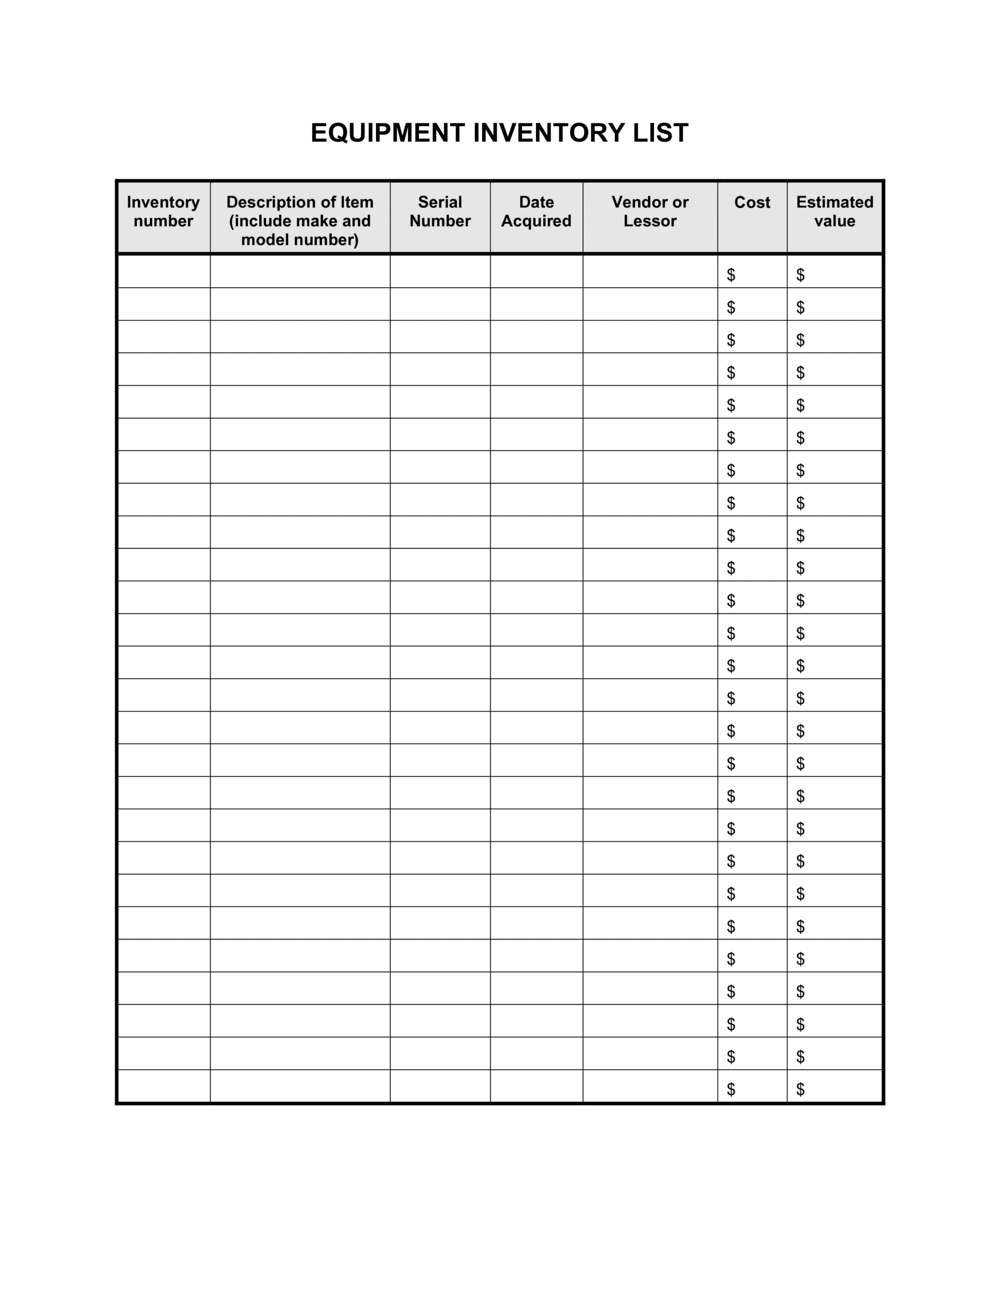 checklist-equipment-inventory-list-template-by-business-in-a-box